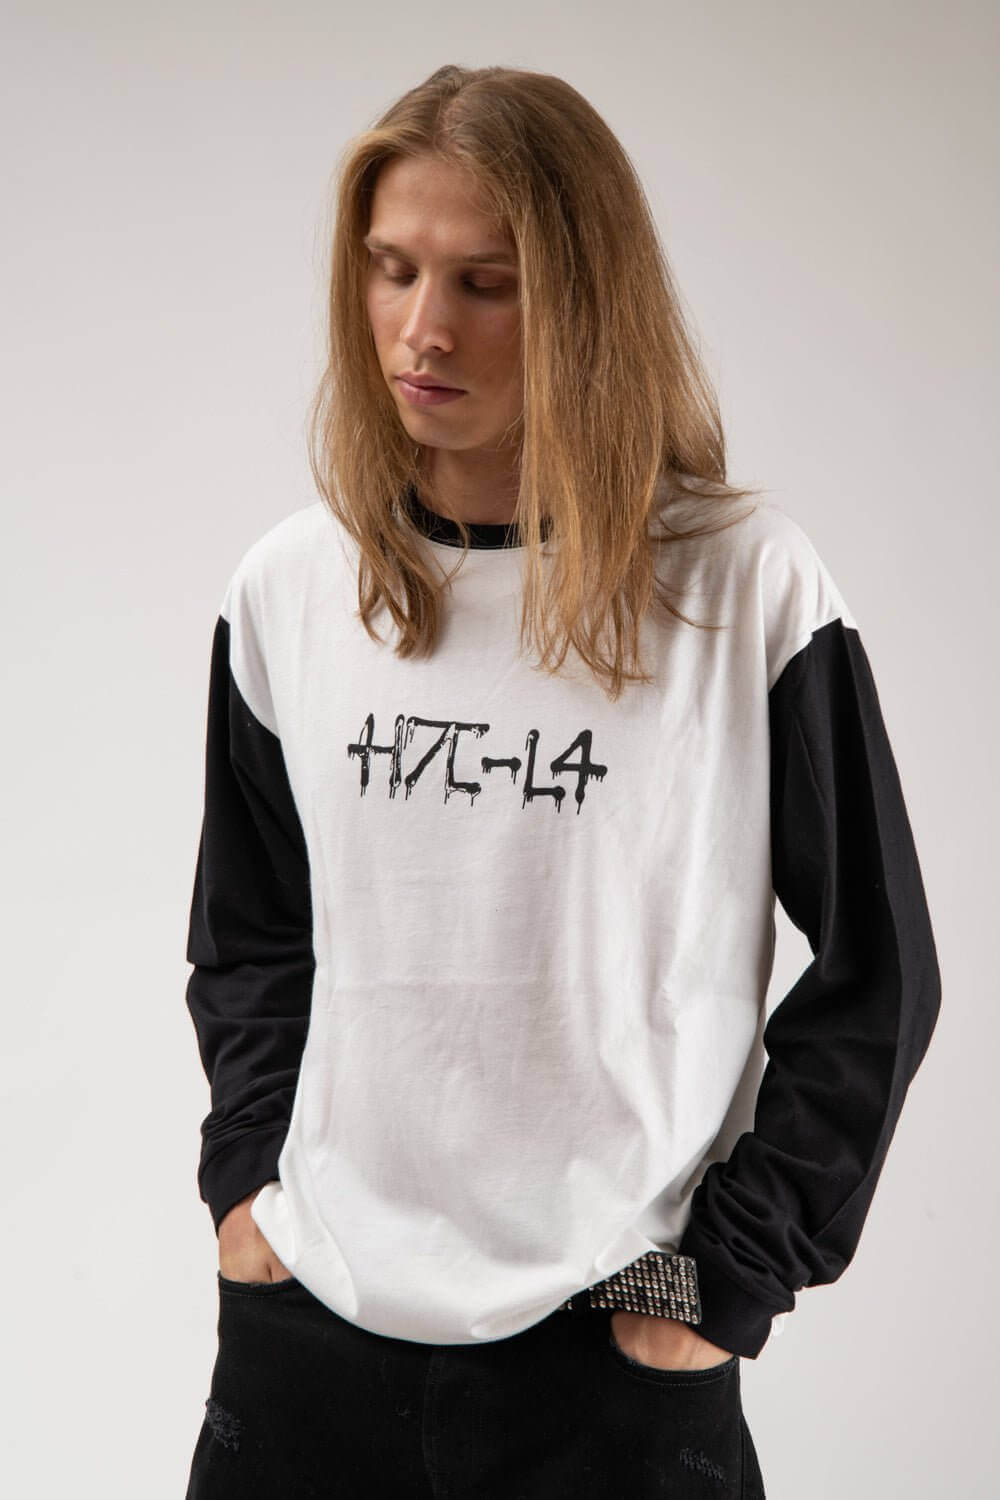 H7C-L4 LS Long-sleeves t-shirt with H7C-L4 script printed on the front. 100% cotton. Made in Italy HTC LOS ANGELES